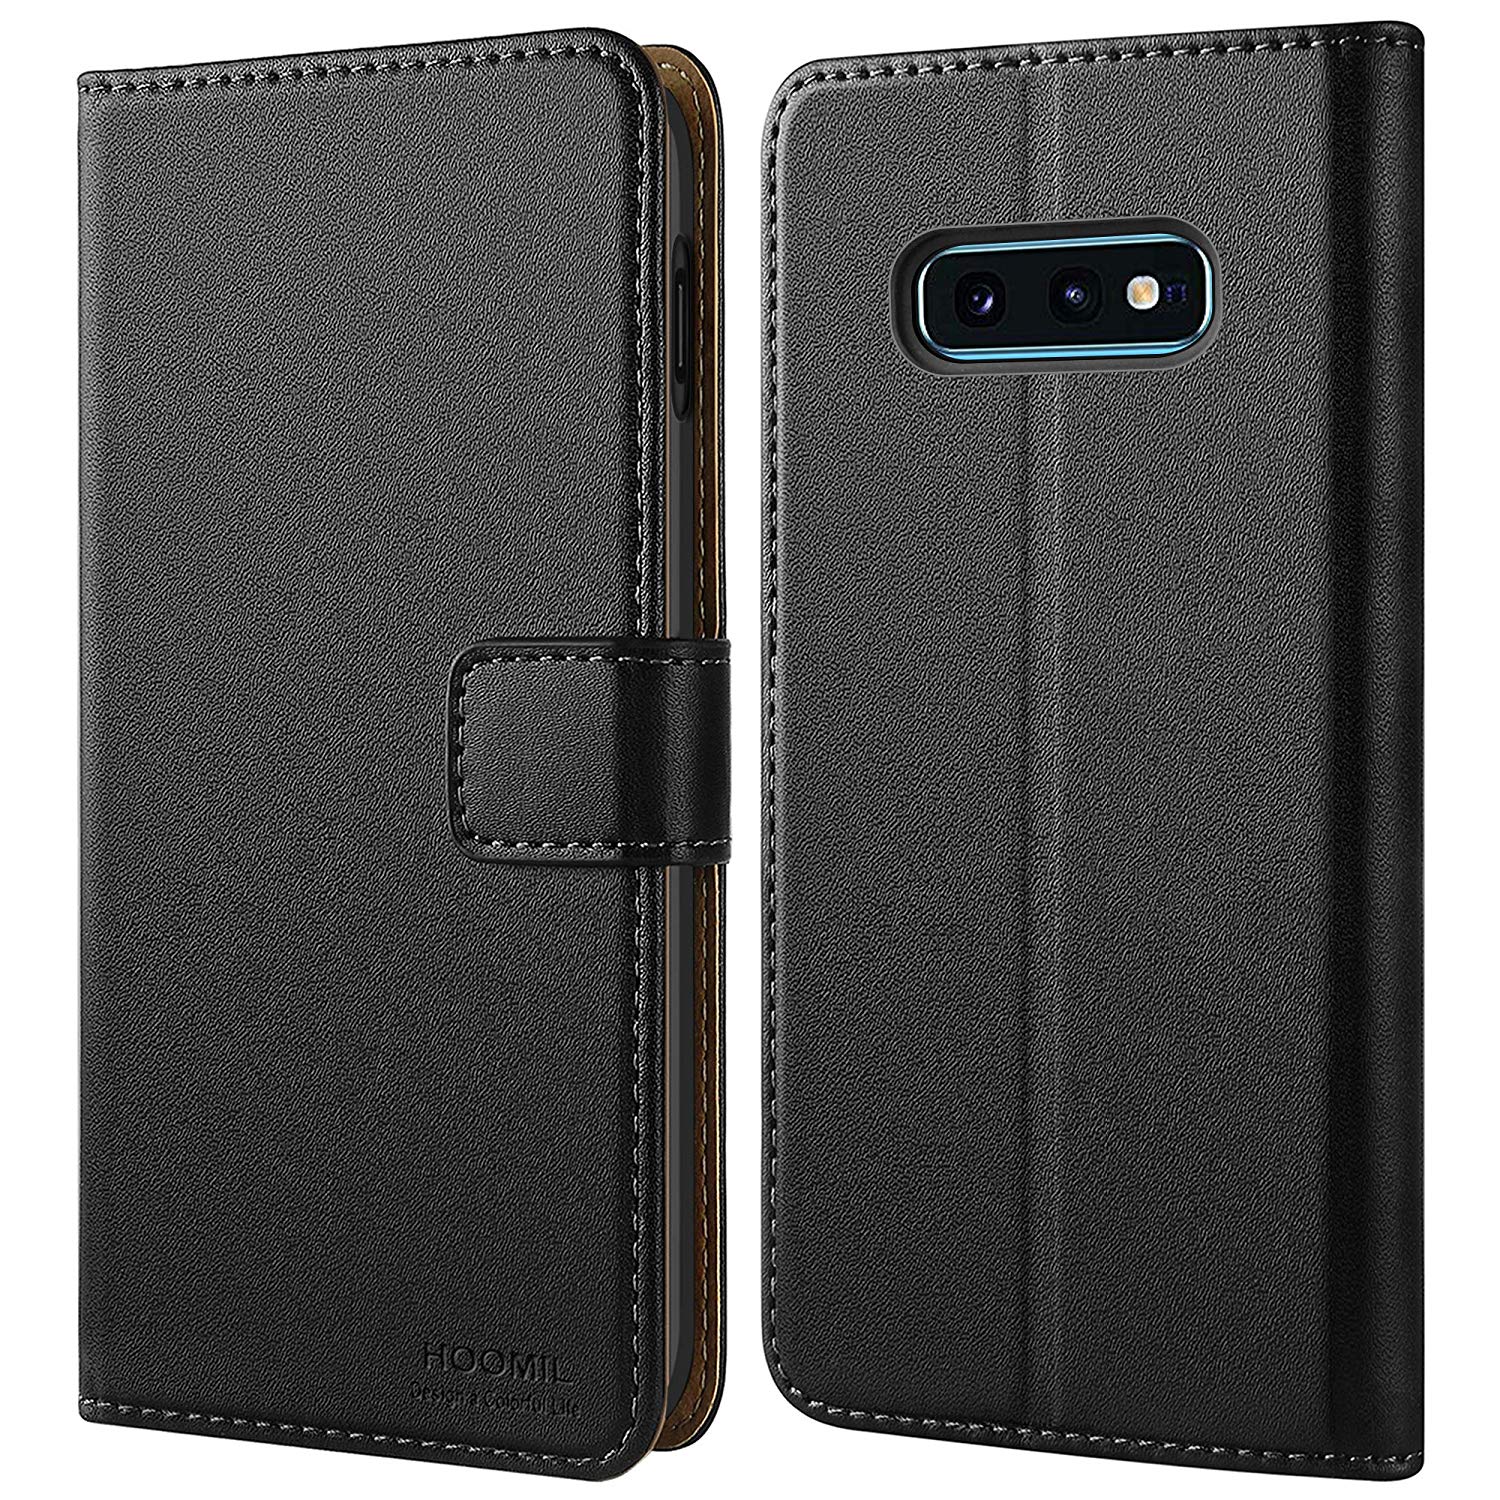 Leather flip case for Galaxy S10E by HOOMIL